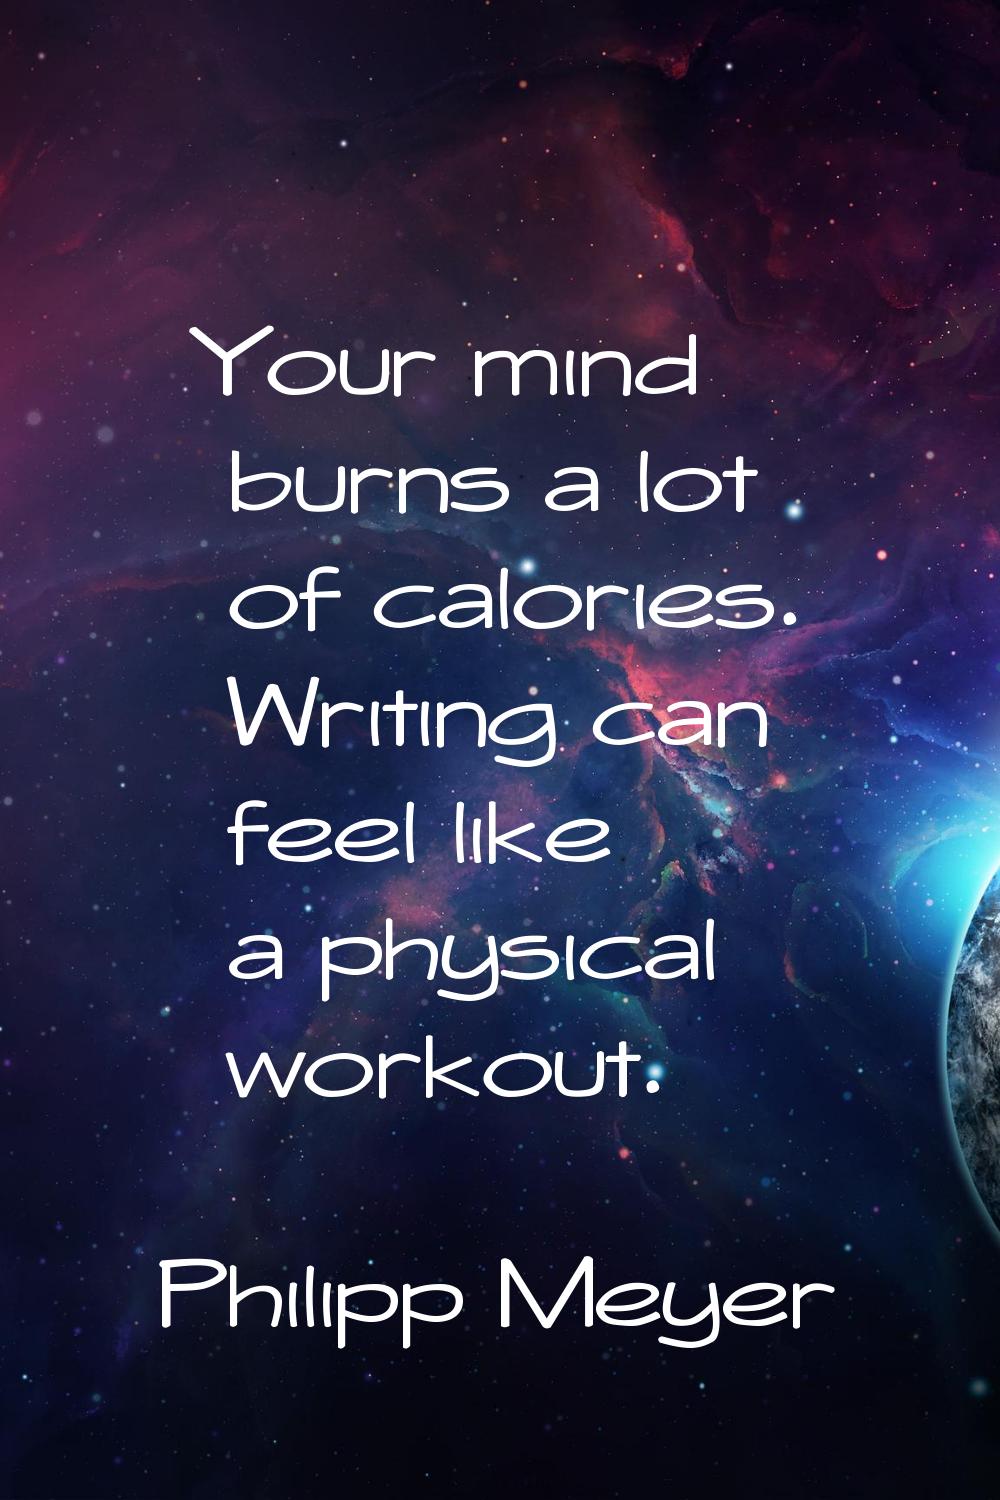 Your mind burns a lot of calories. Writing can feel like a physical workout.